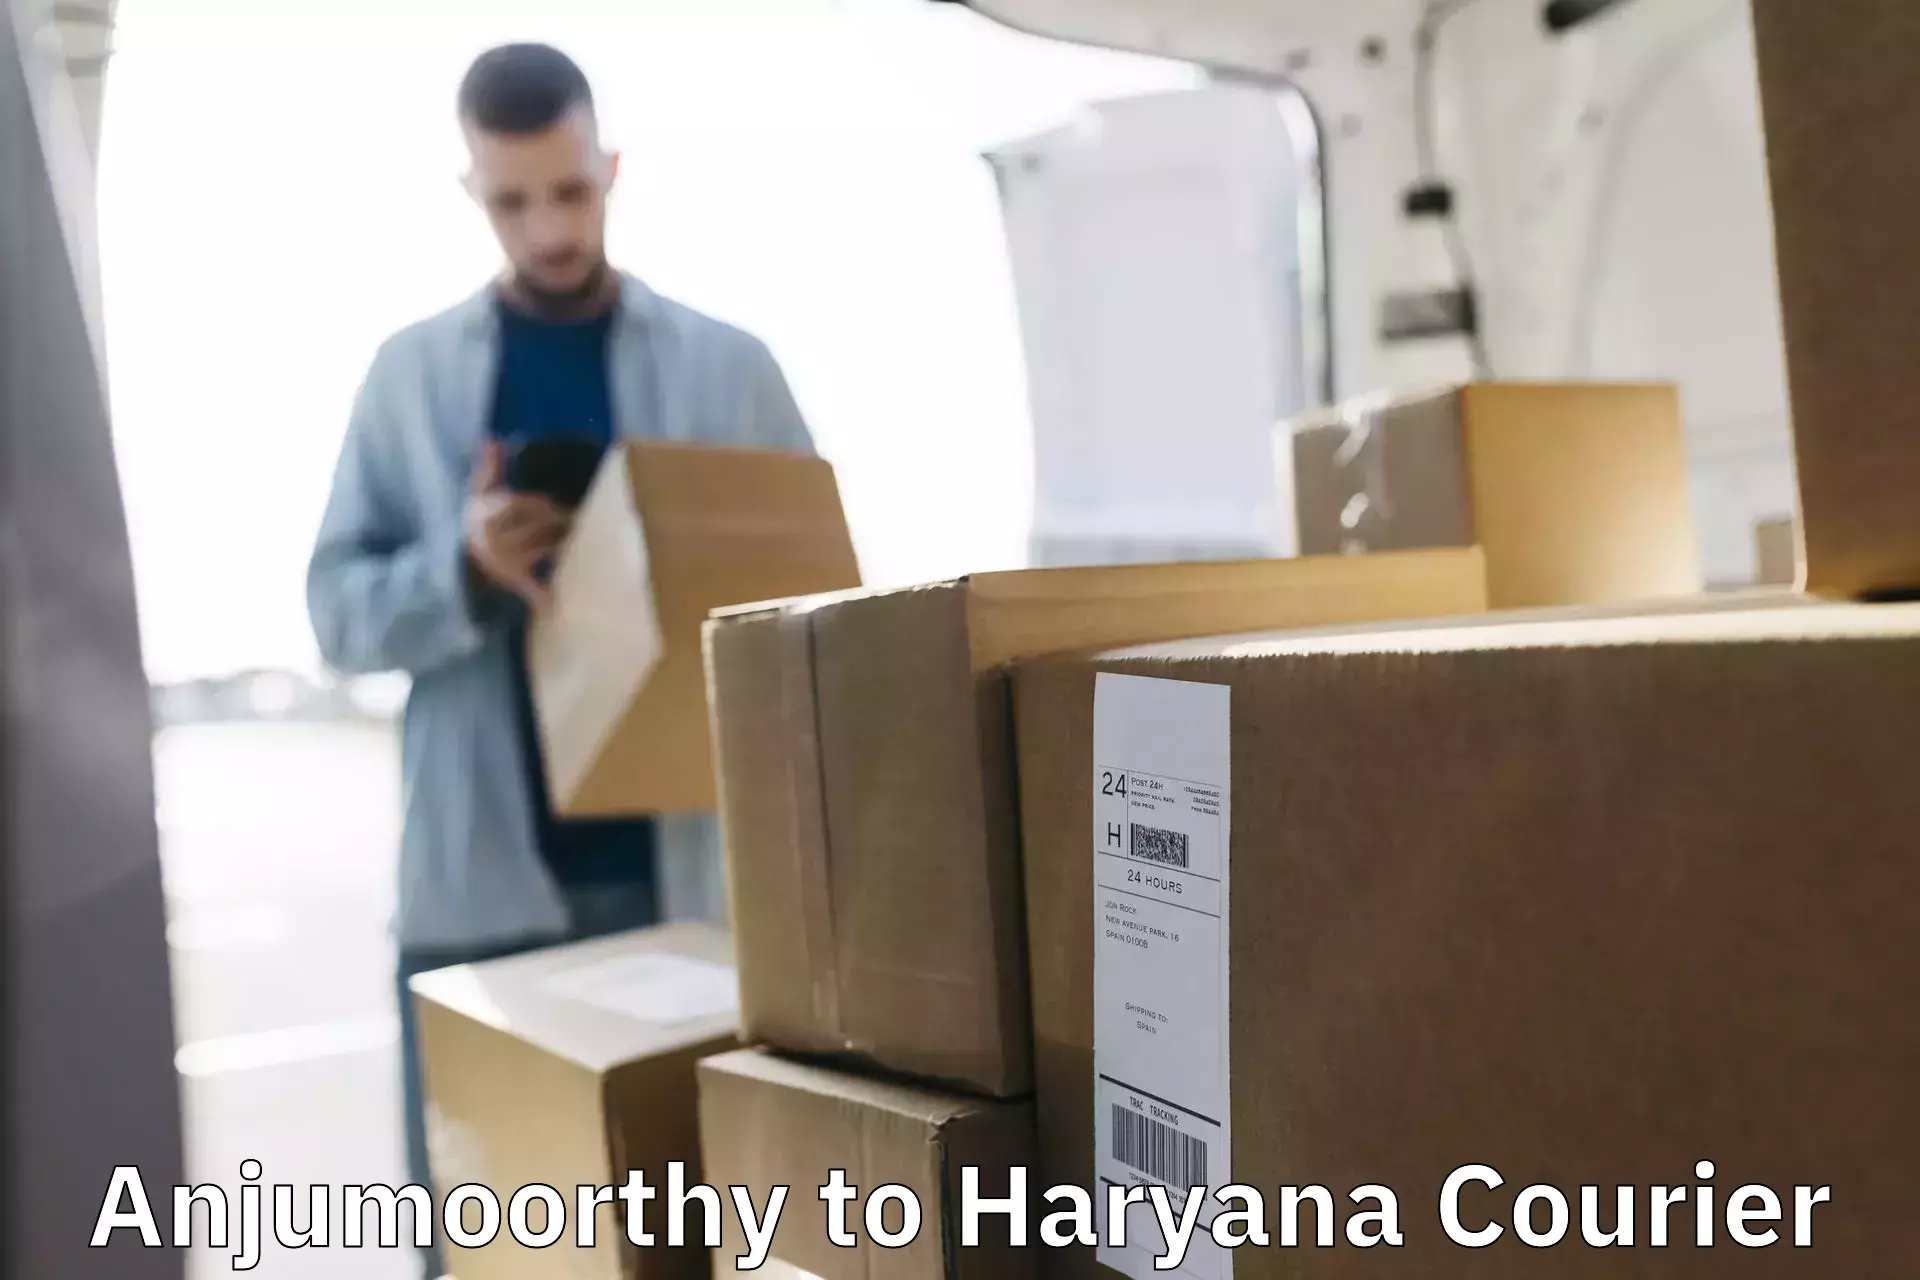 Multi-national courier services Anjumoorthy to Hodal